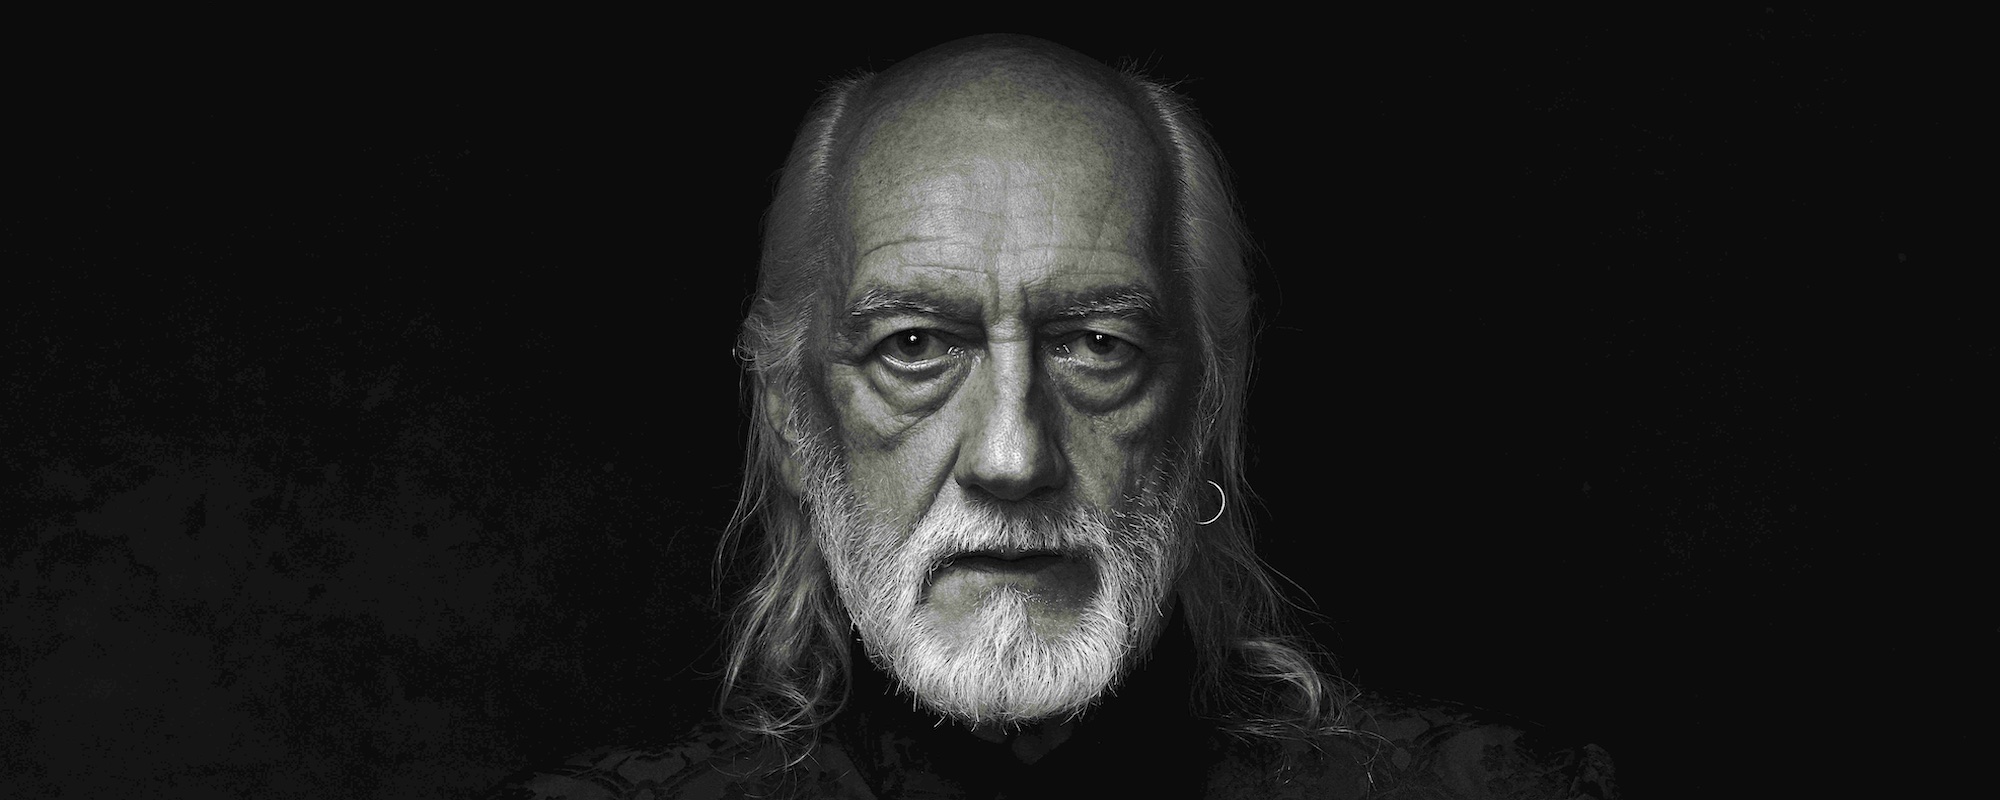 Mick Fleetwood Honors Christine McVie on her 80th Birthday with Cover of “Songbird”